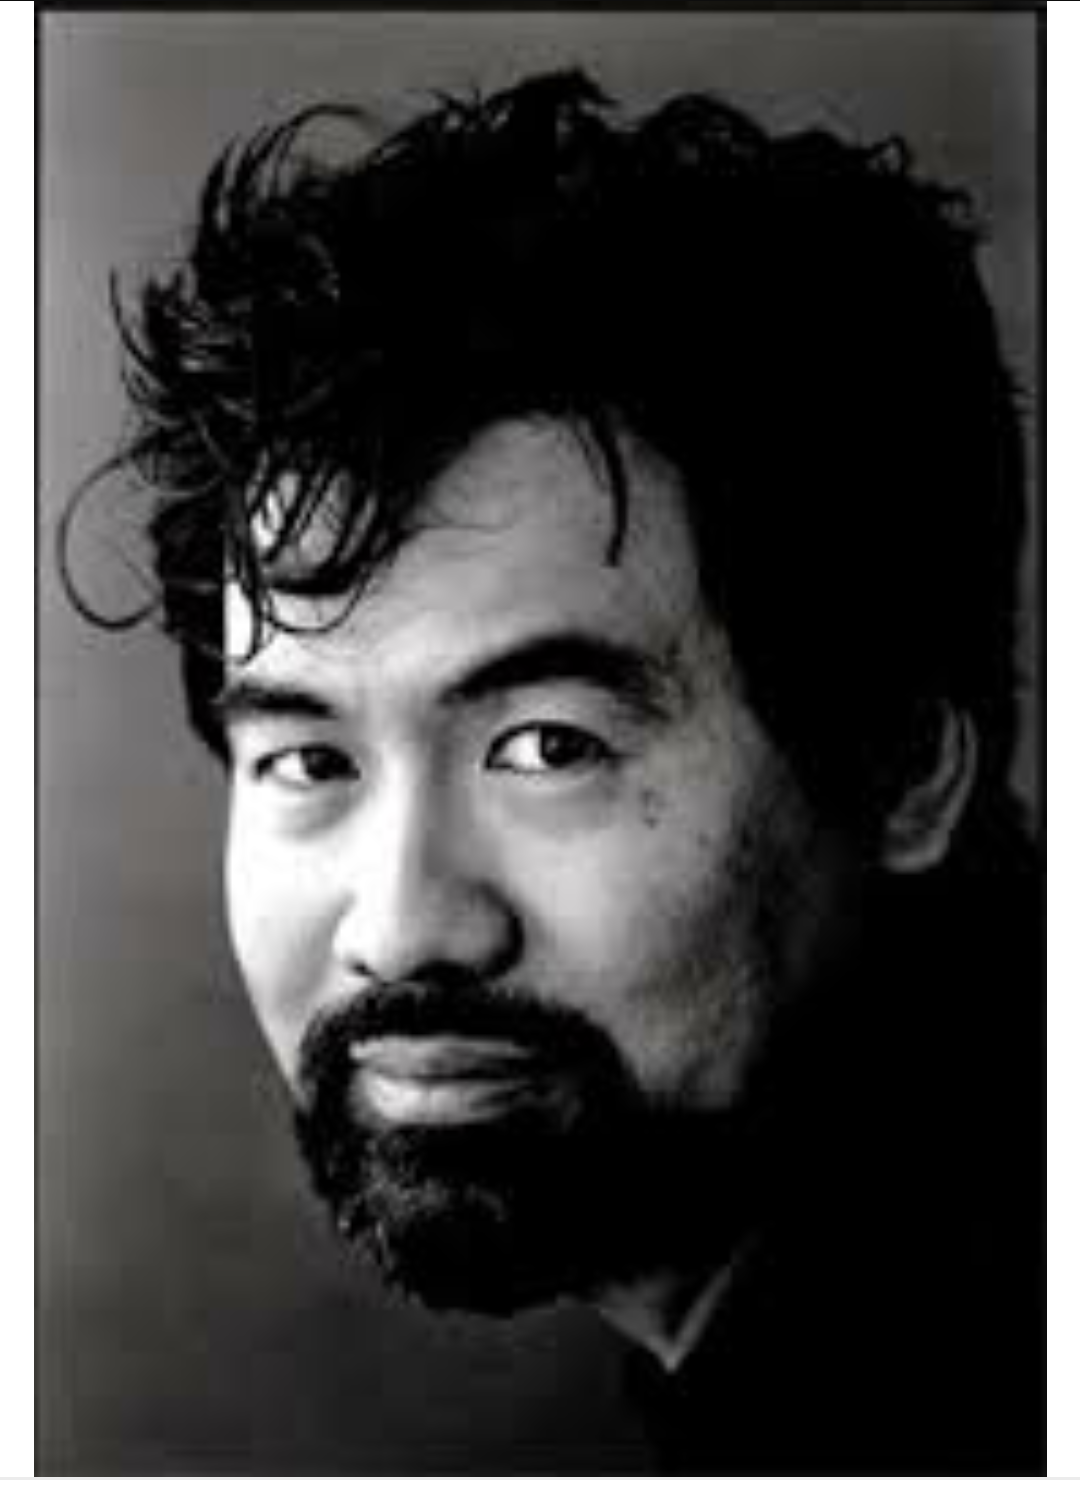 Trying to find Chinatown : David Henry Hwang